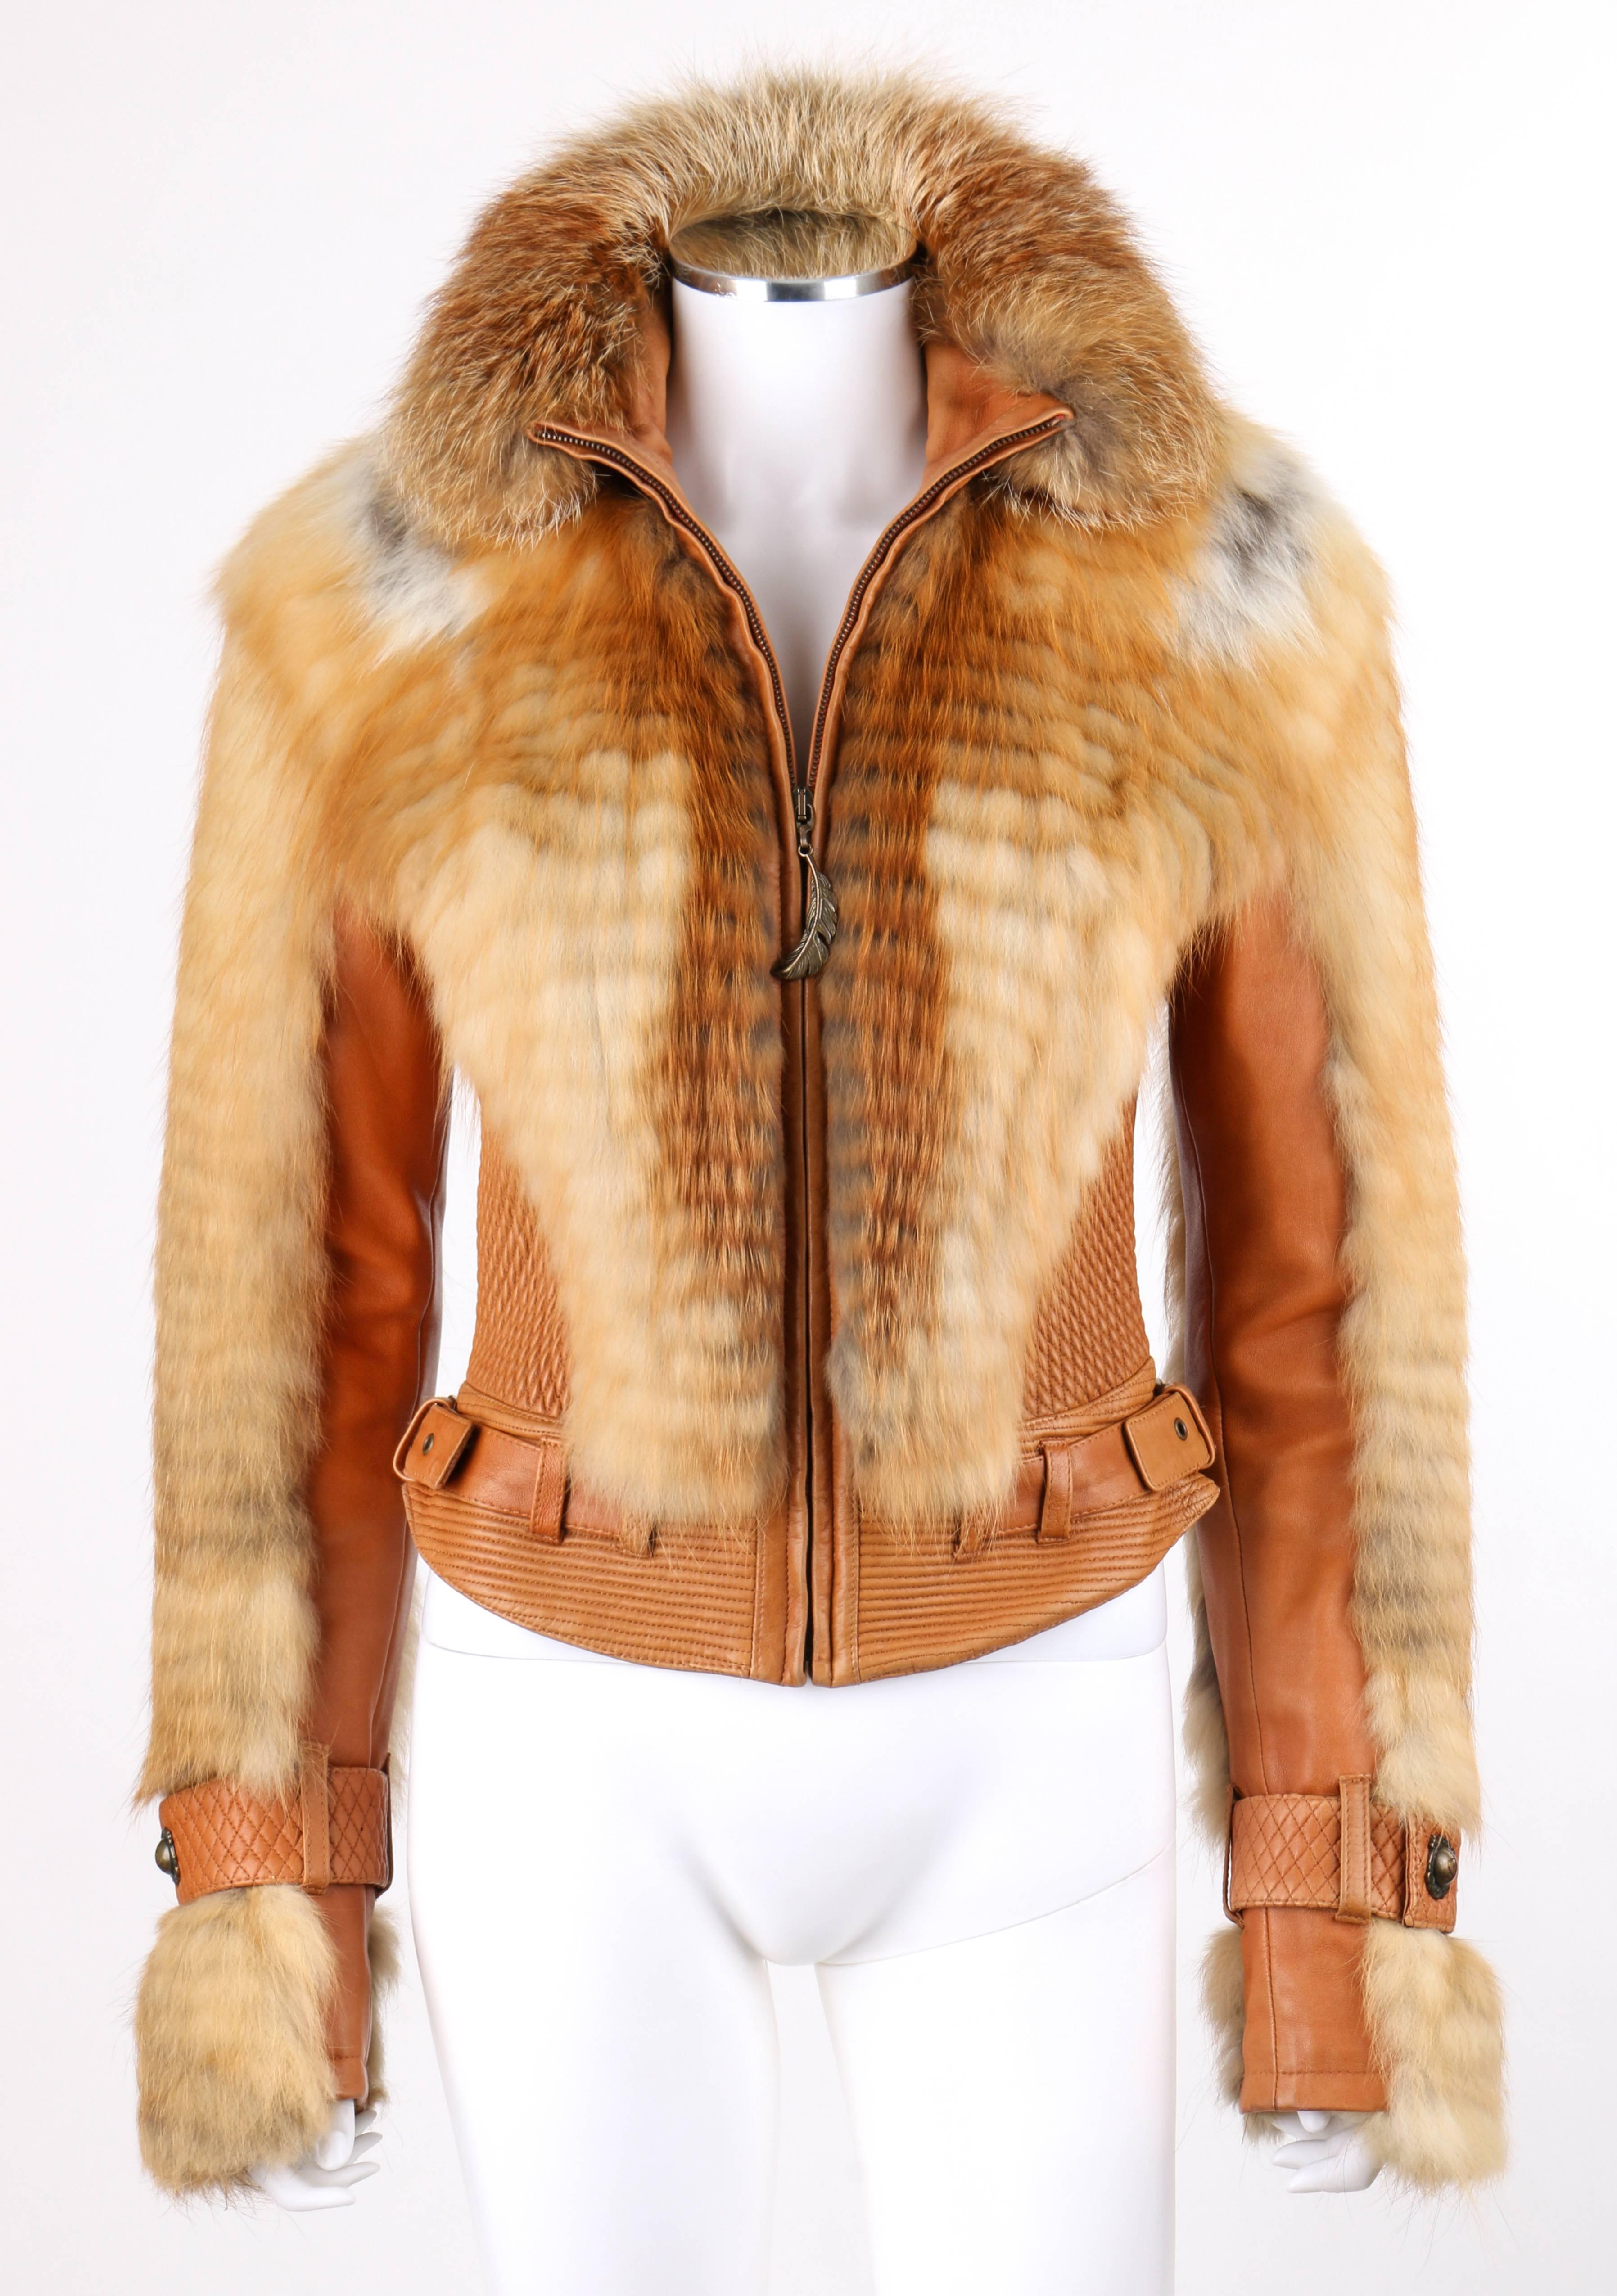 Just Cavalli by Roberto Cavalli Autumn/Winter 2007 tan leather genuine fox fur motorcycle jacket. Ribbed leather mandarin collar with fox fur trim along top. Three belt loop detail along back of collar. Center front zipper closure with brass-toned